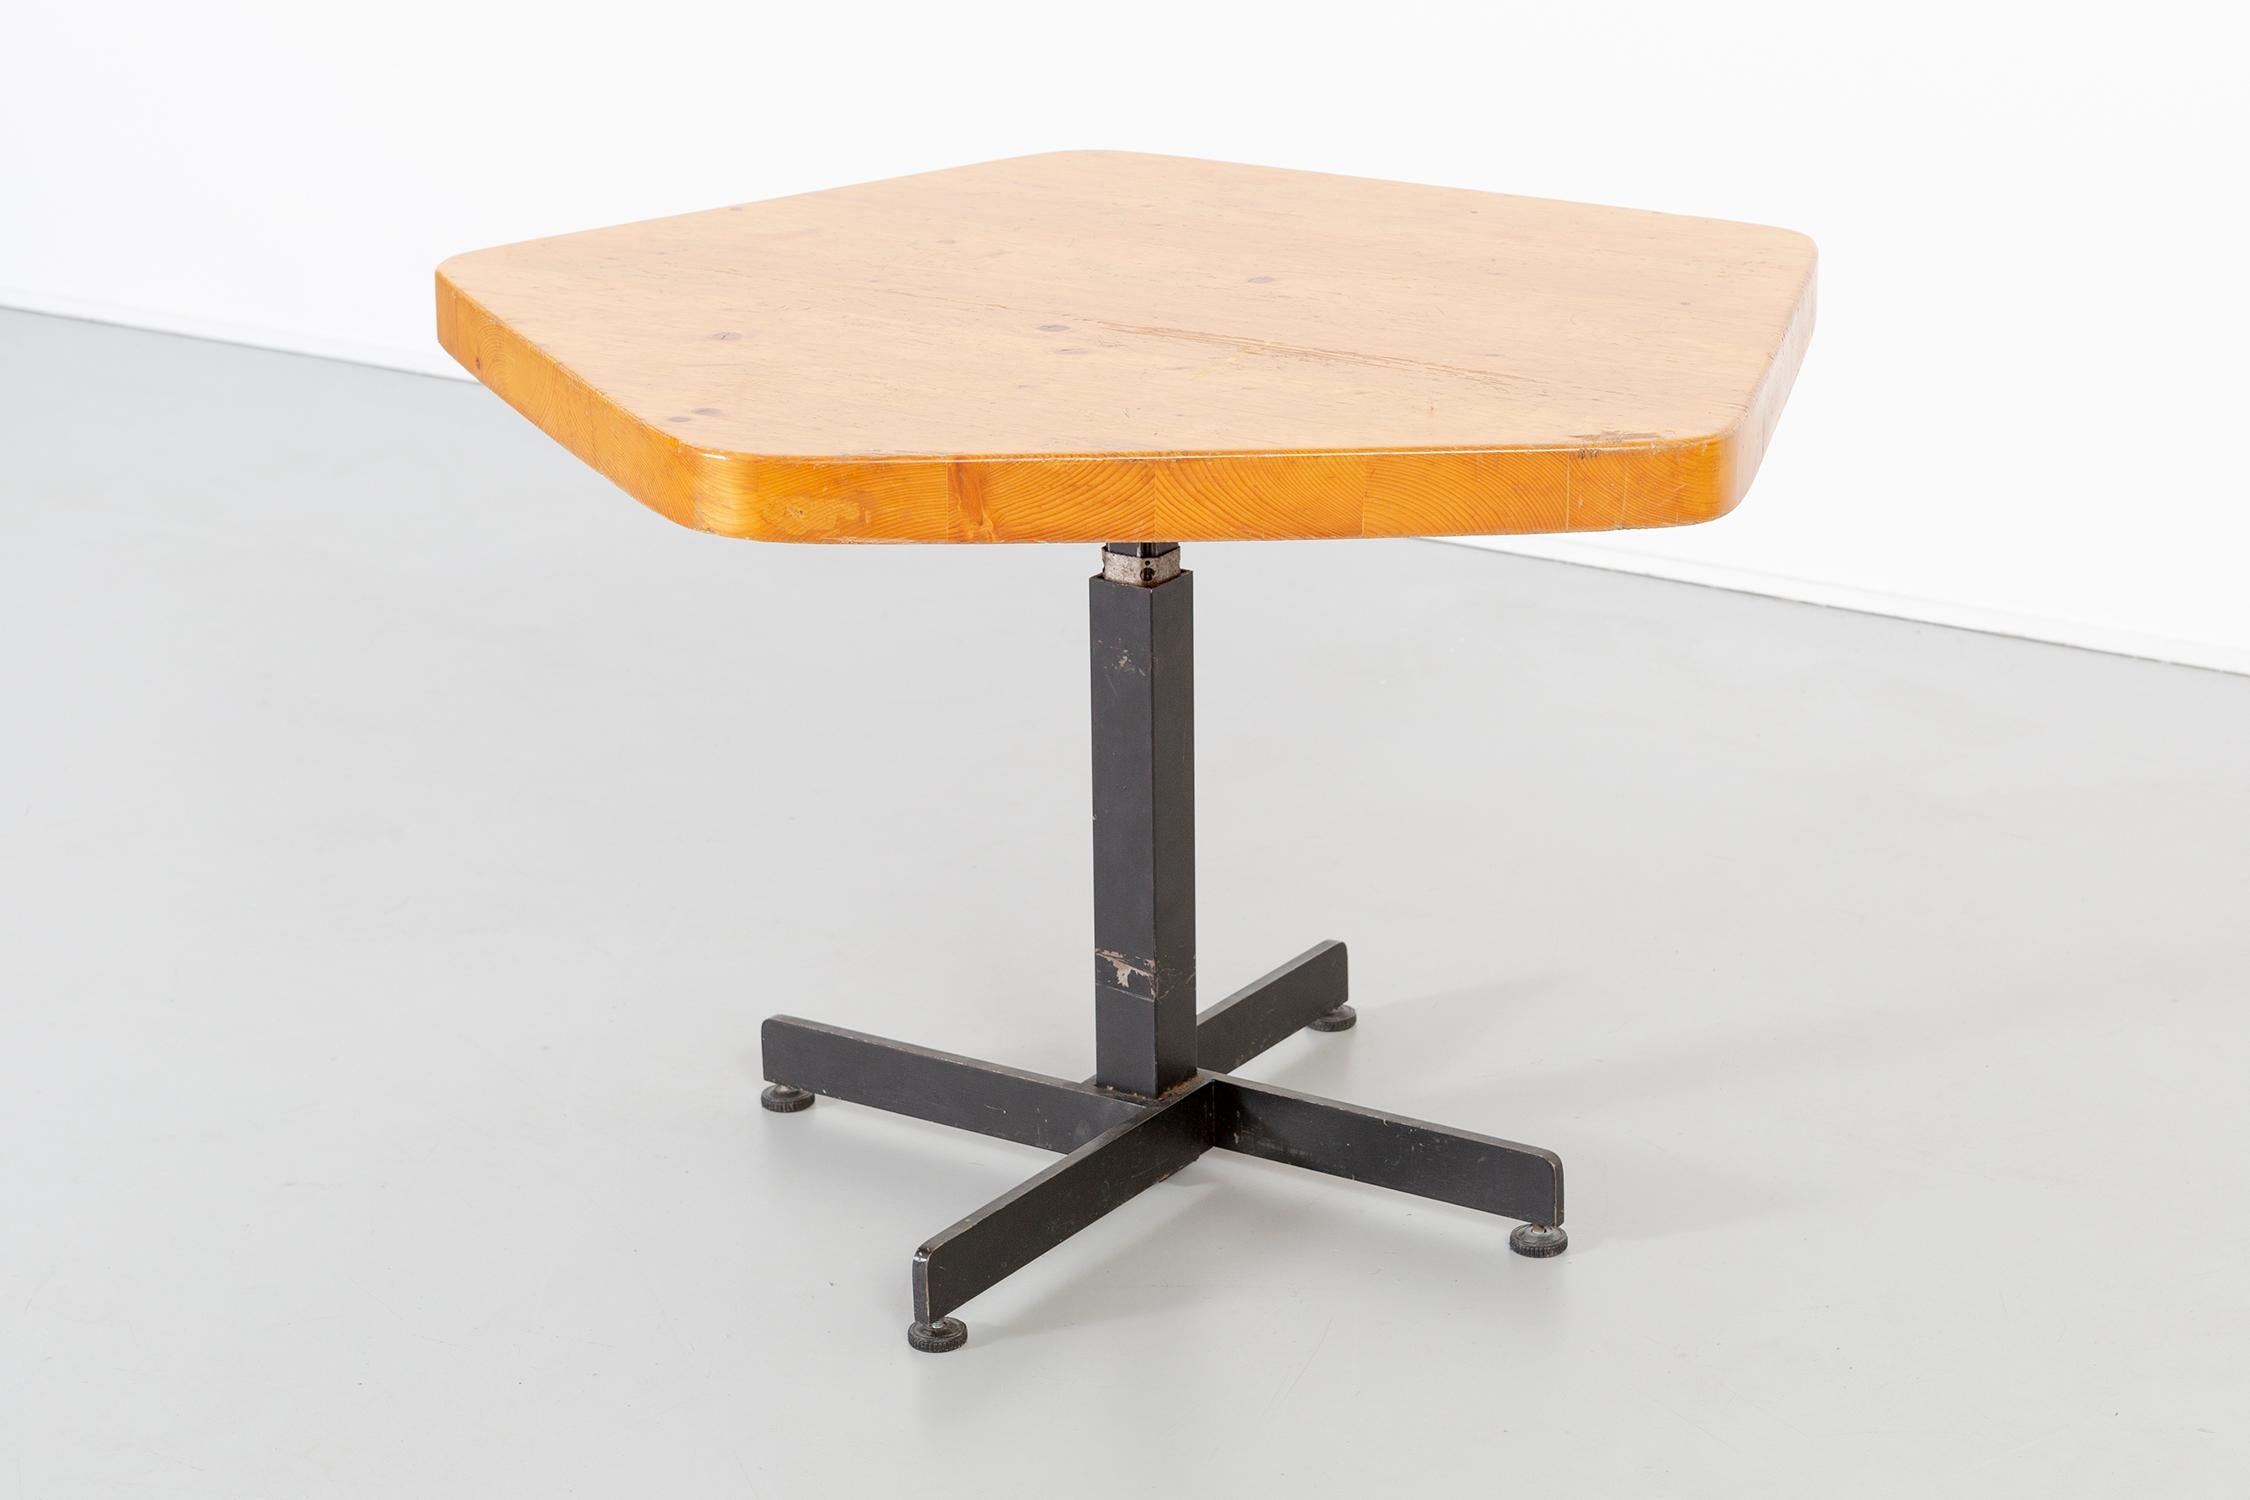 French Charlotte Perriand Mid-Century Modern Adjustable Pentagonal Table for Les Arcs For Sale